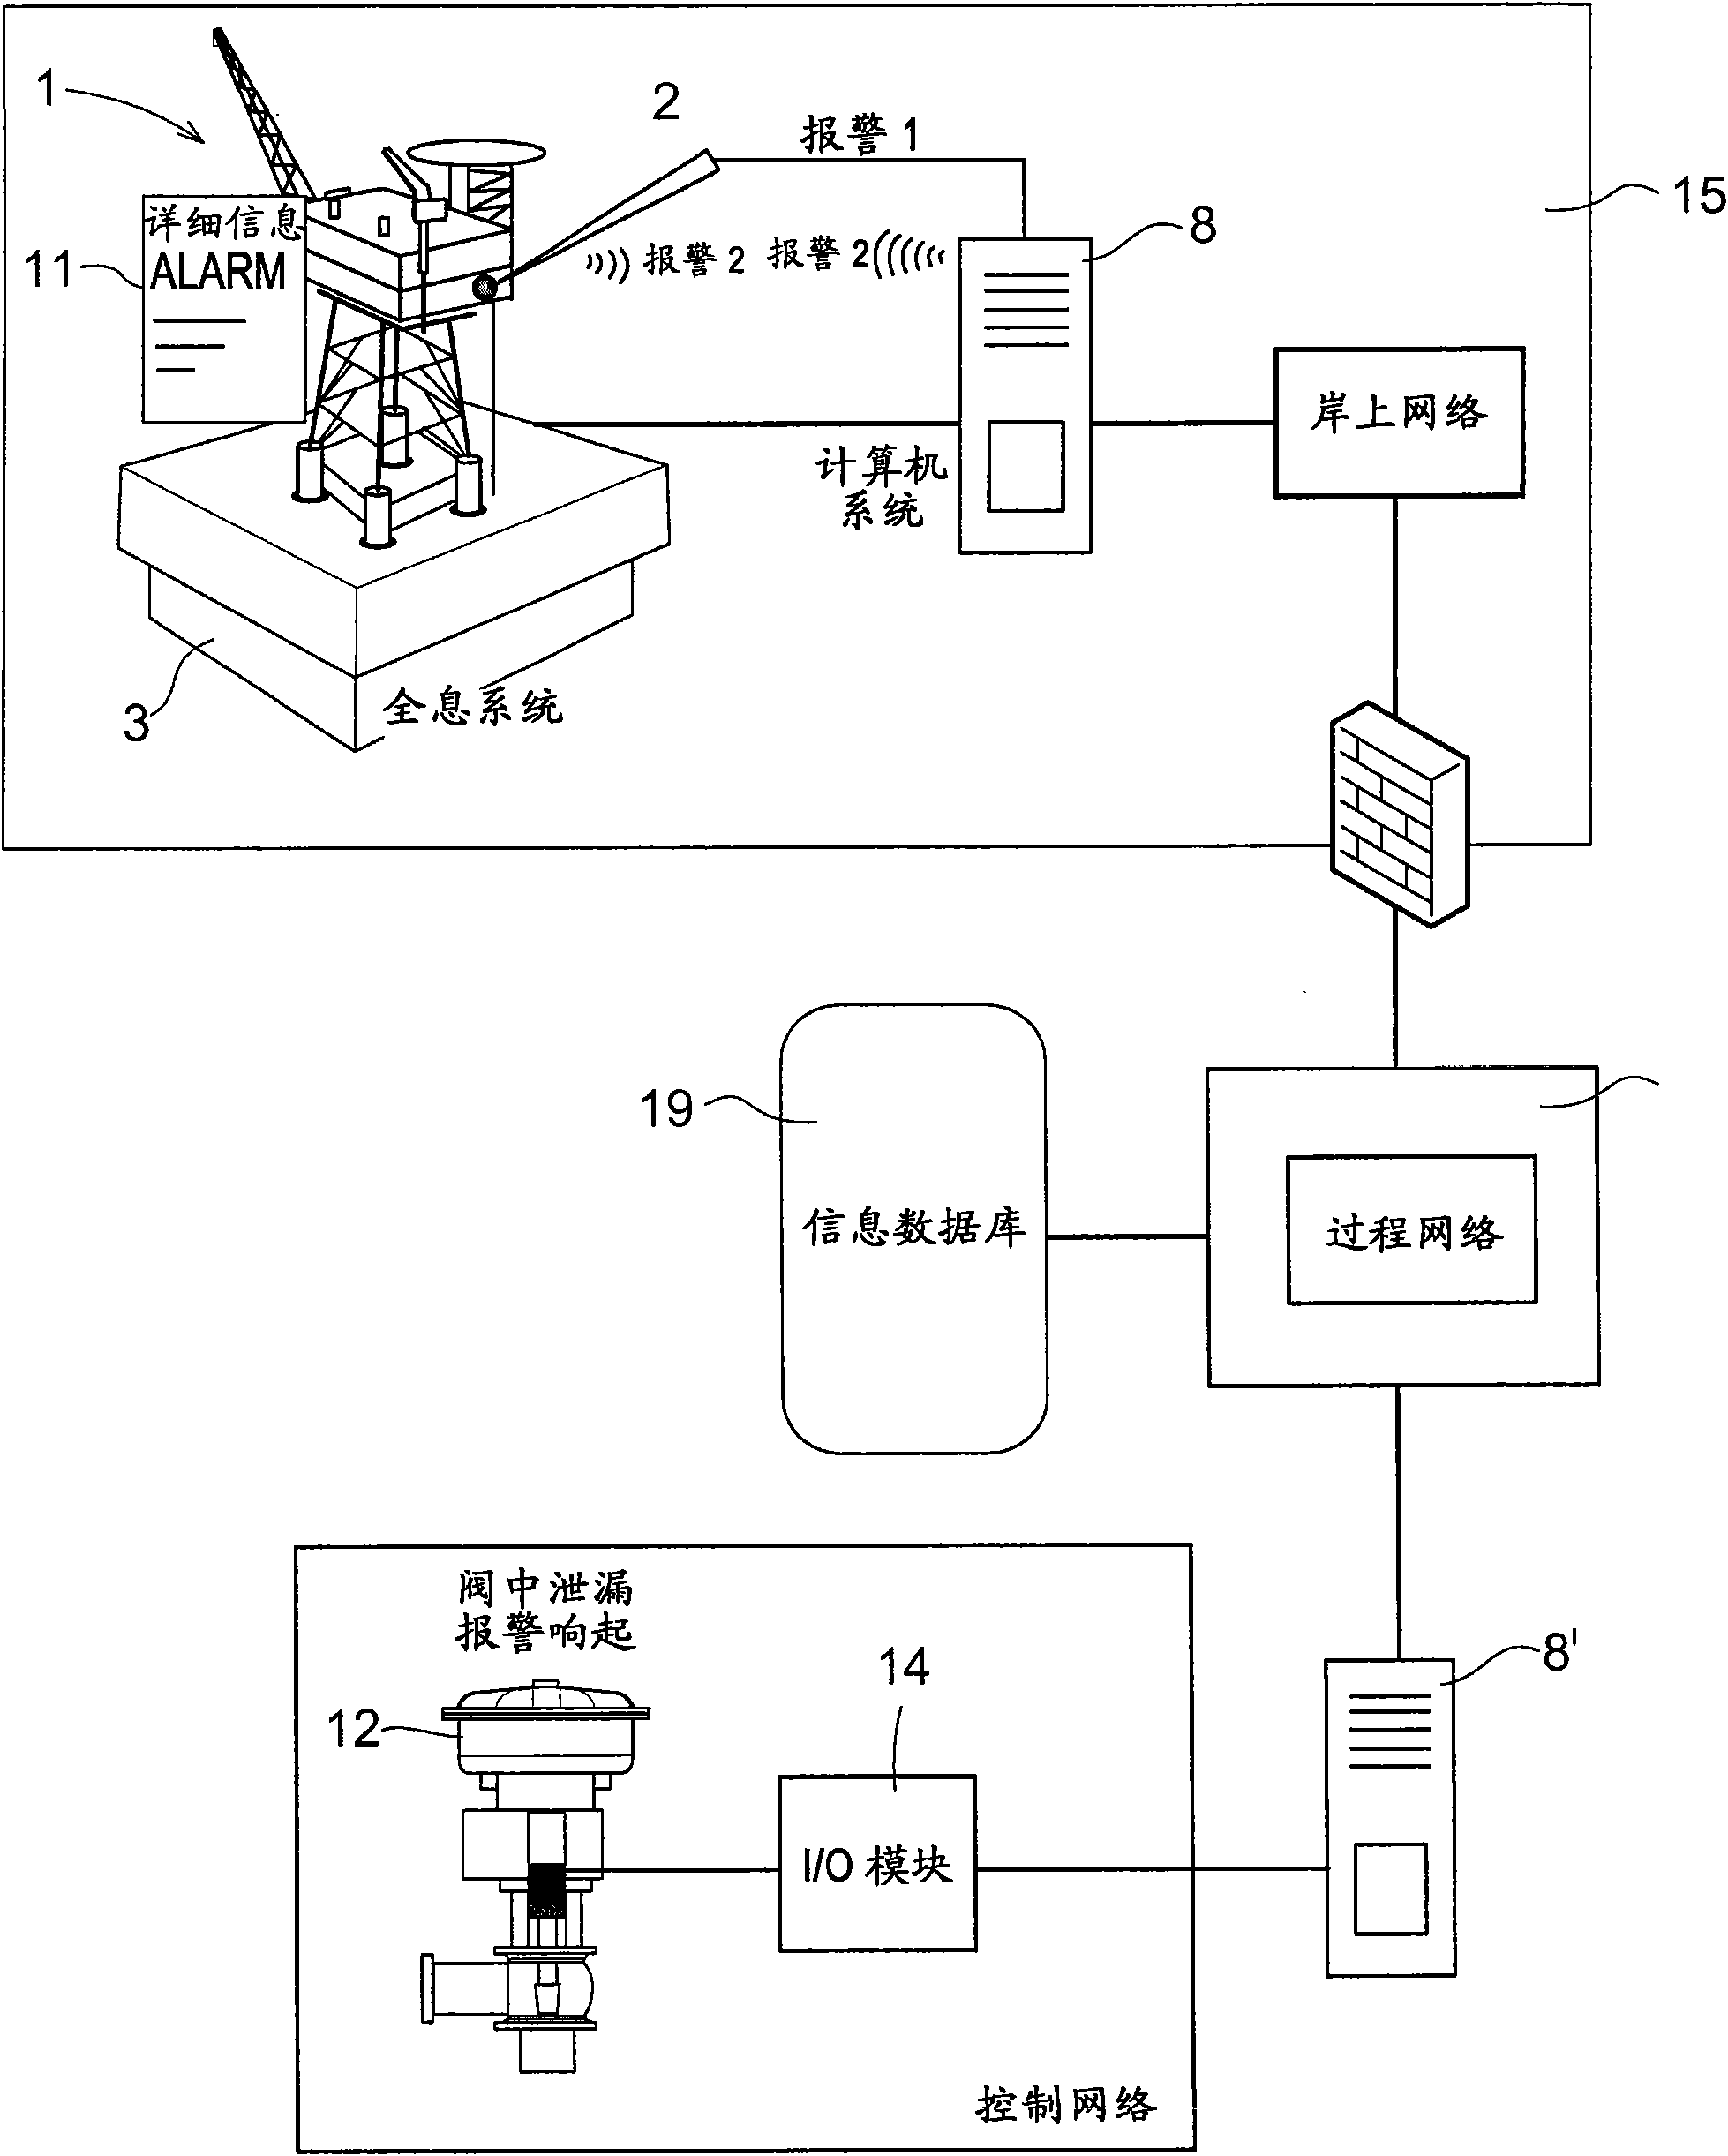 A computer implemented method to display technical data for monitoring an industrial installation